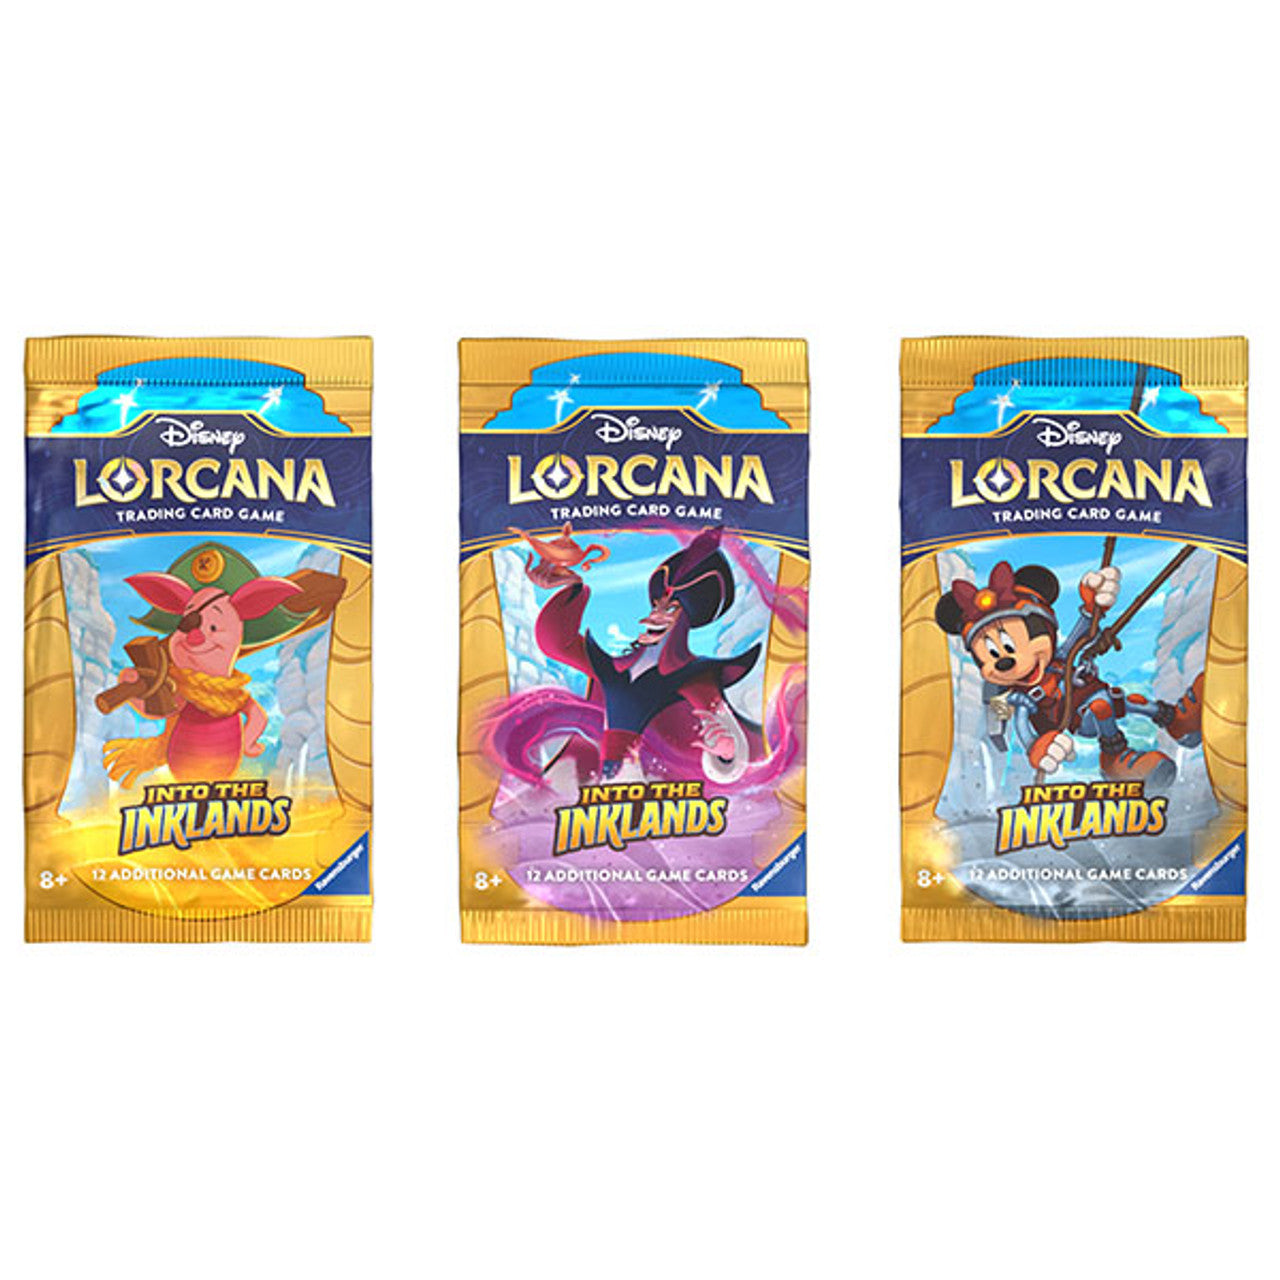 Disney Lorcana Trading Card Game - Into the Inklands Booster Pack - PRE ORDER See Description for Release Date Details - Loaded Dice Barry Vale of Glamorgan CF64 3HD